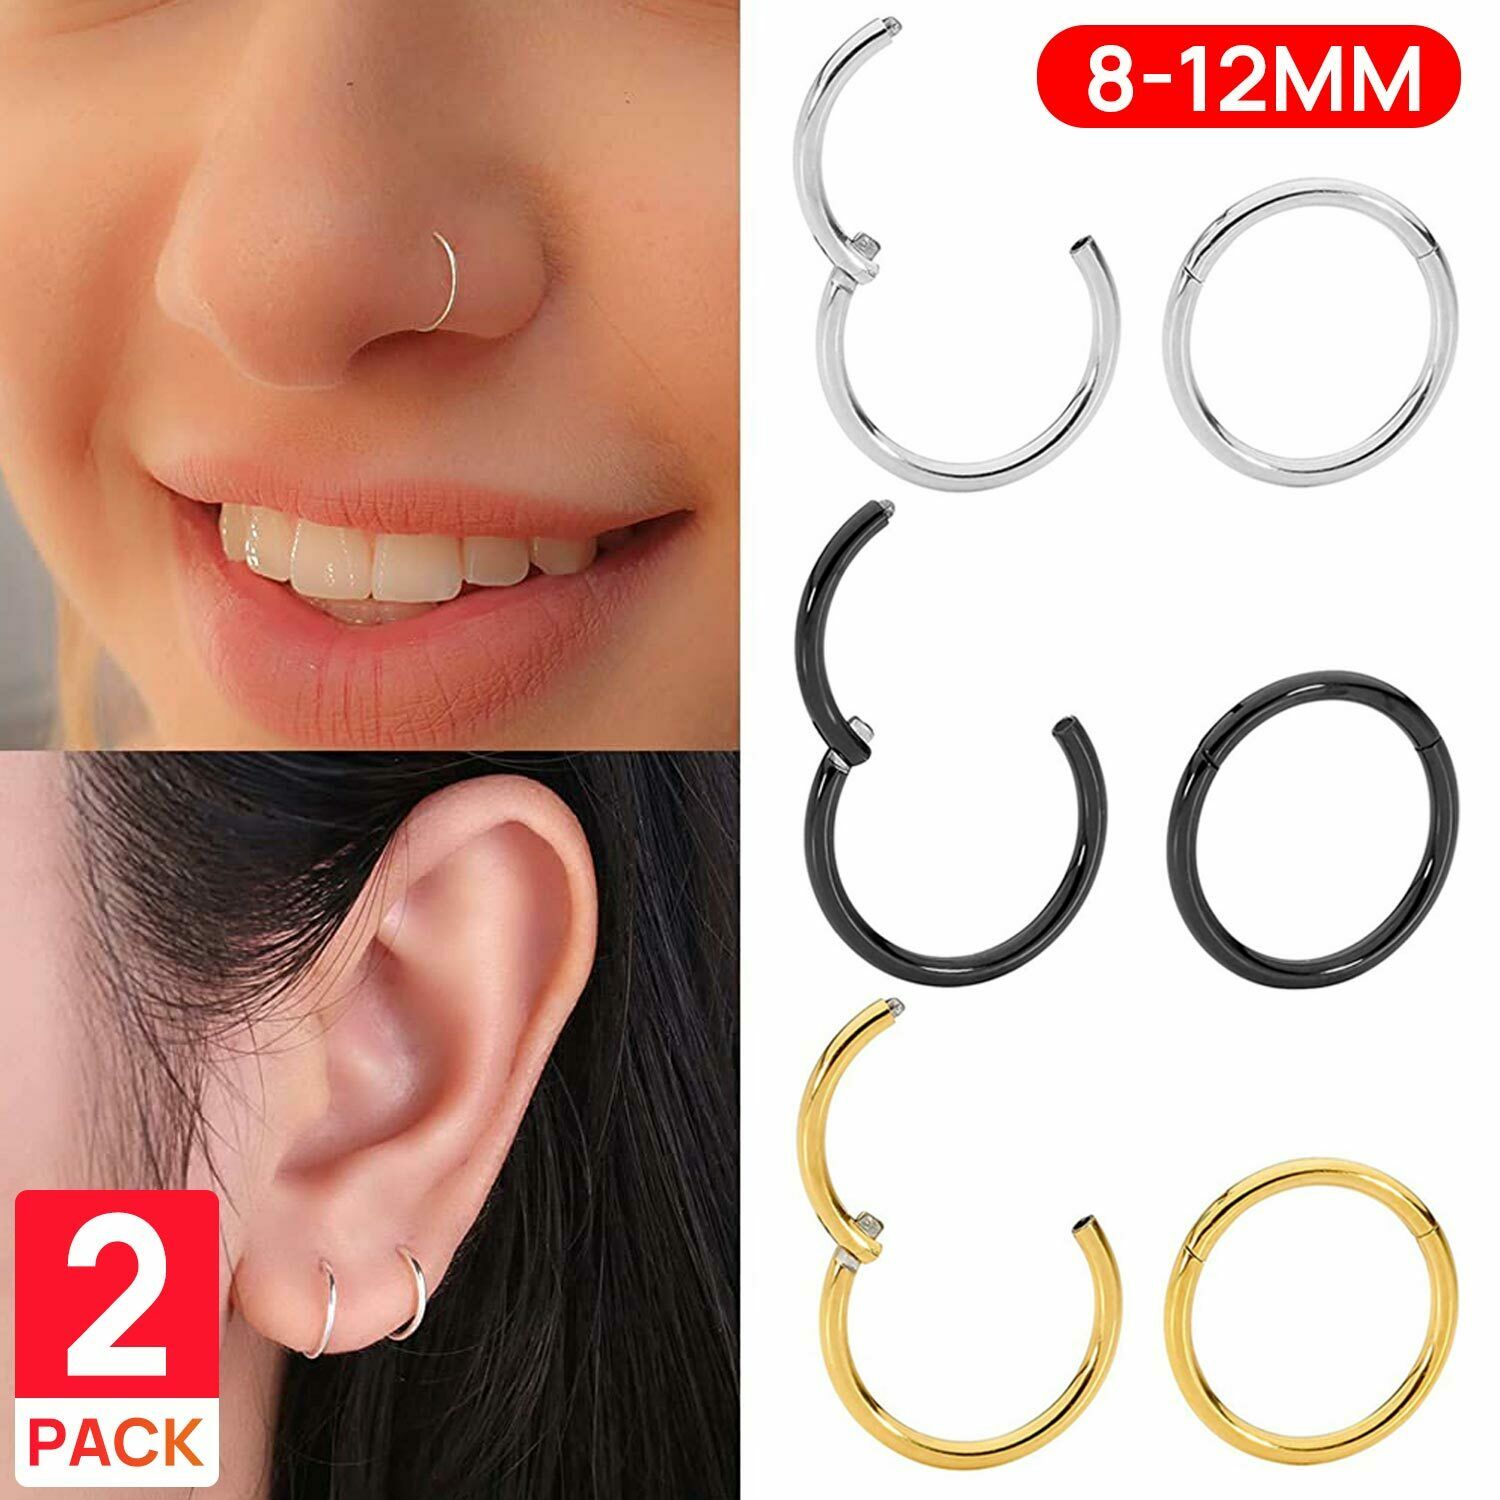 2PS Stainless Steel Segment Hinged Clicker Ear Nose Lip Body Ring Hoop Piercing